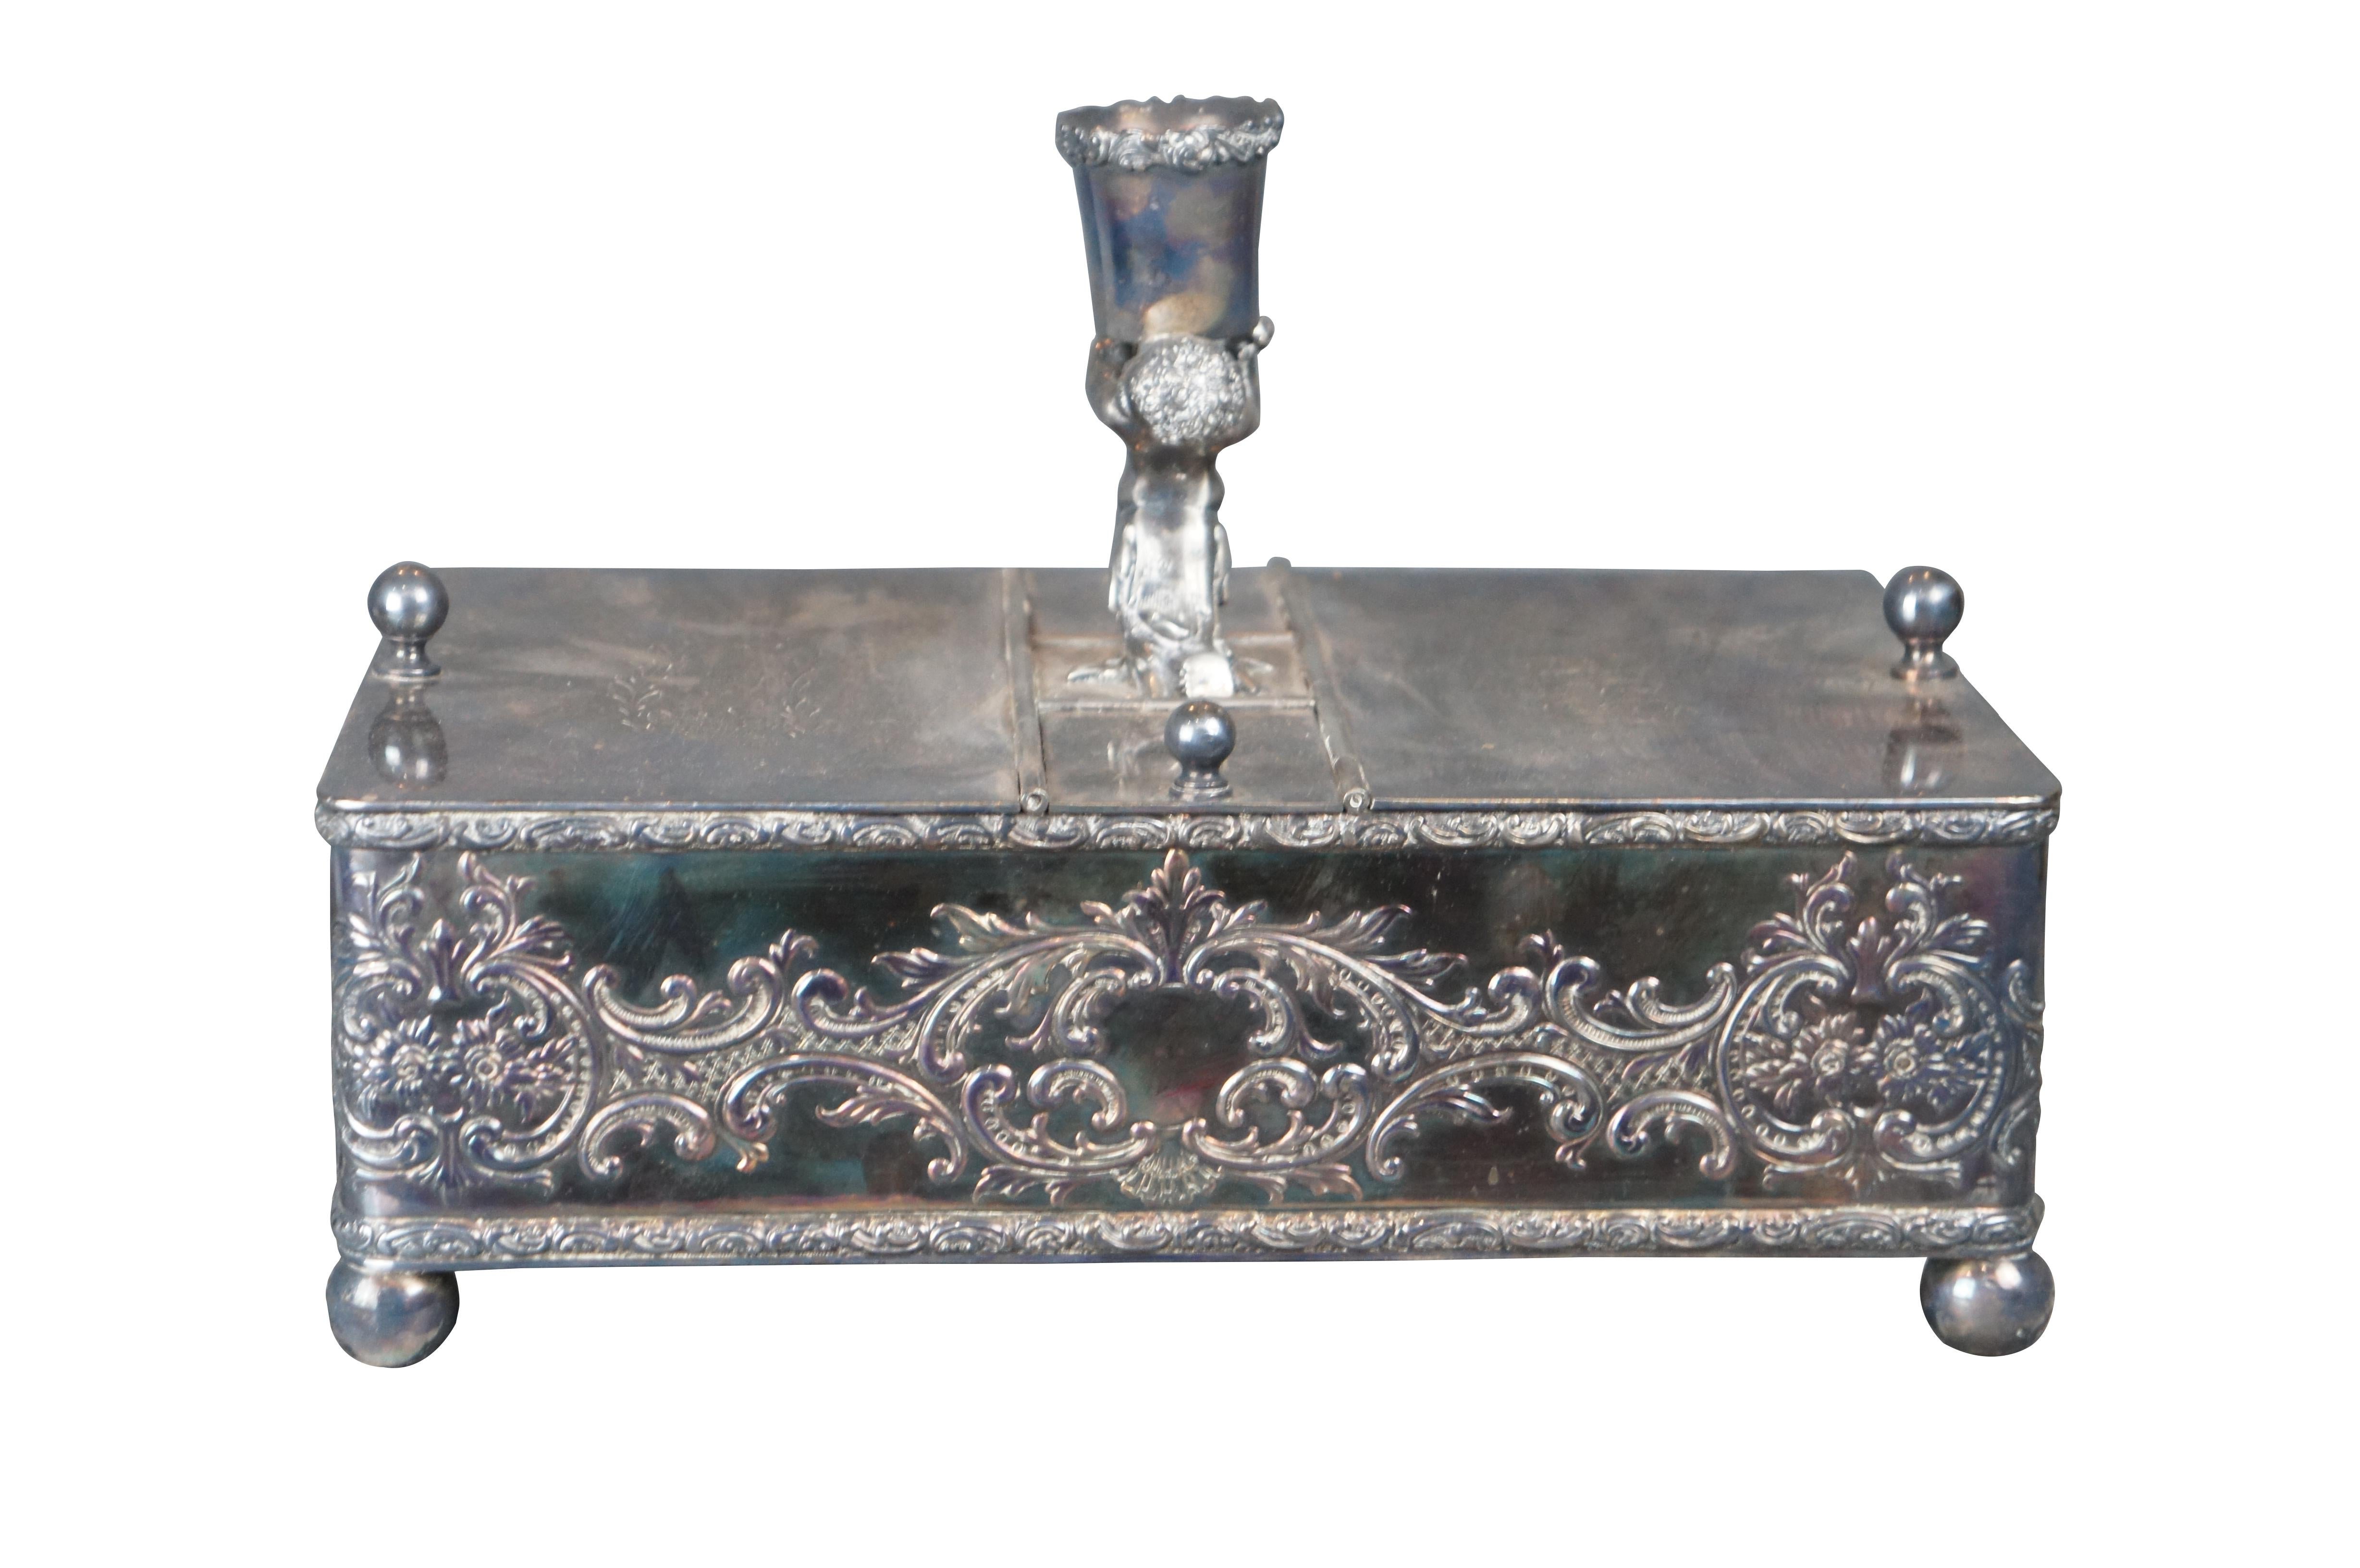 Antique Meriden Victorian Silverplate Divided Humidor Box Figural Candlestick In Good Condition For Sale In Dayton, OH